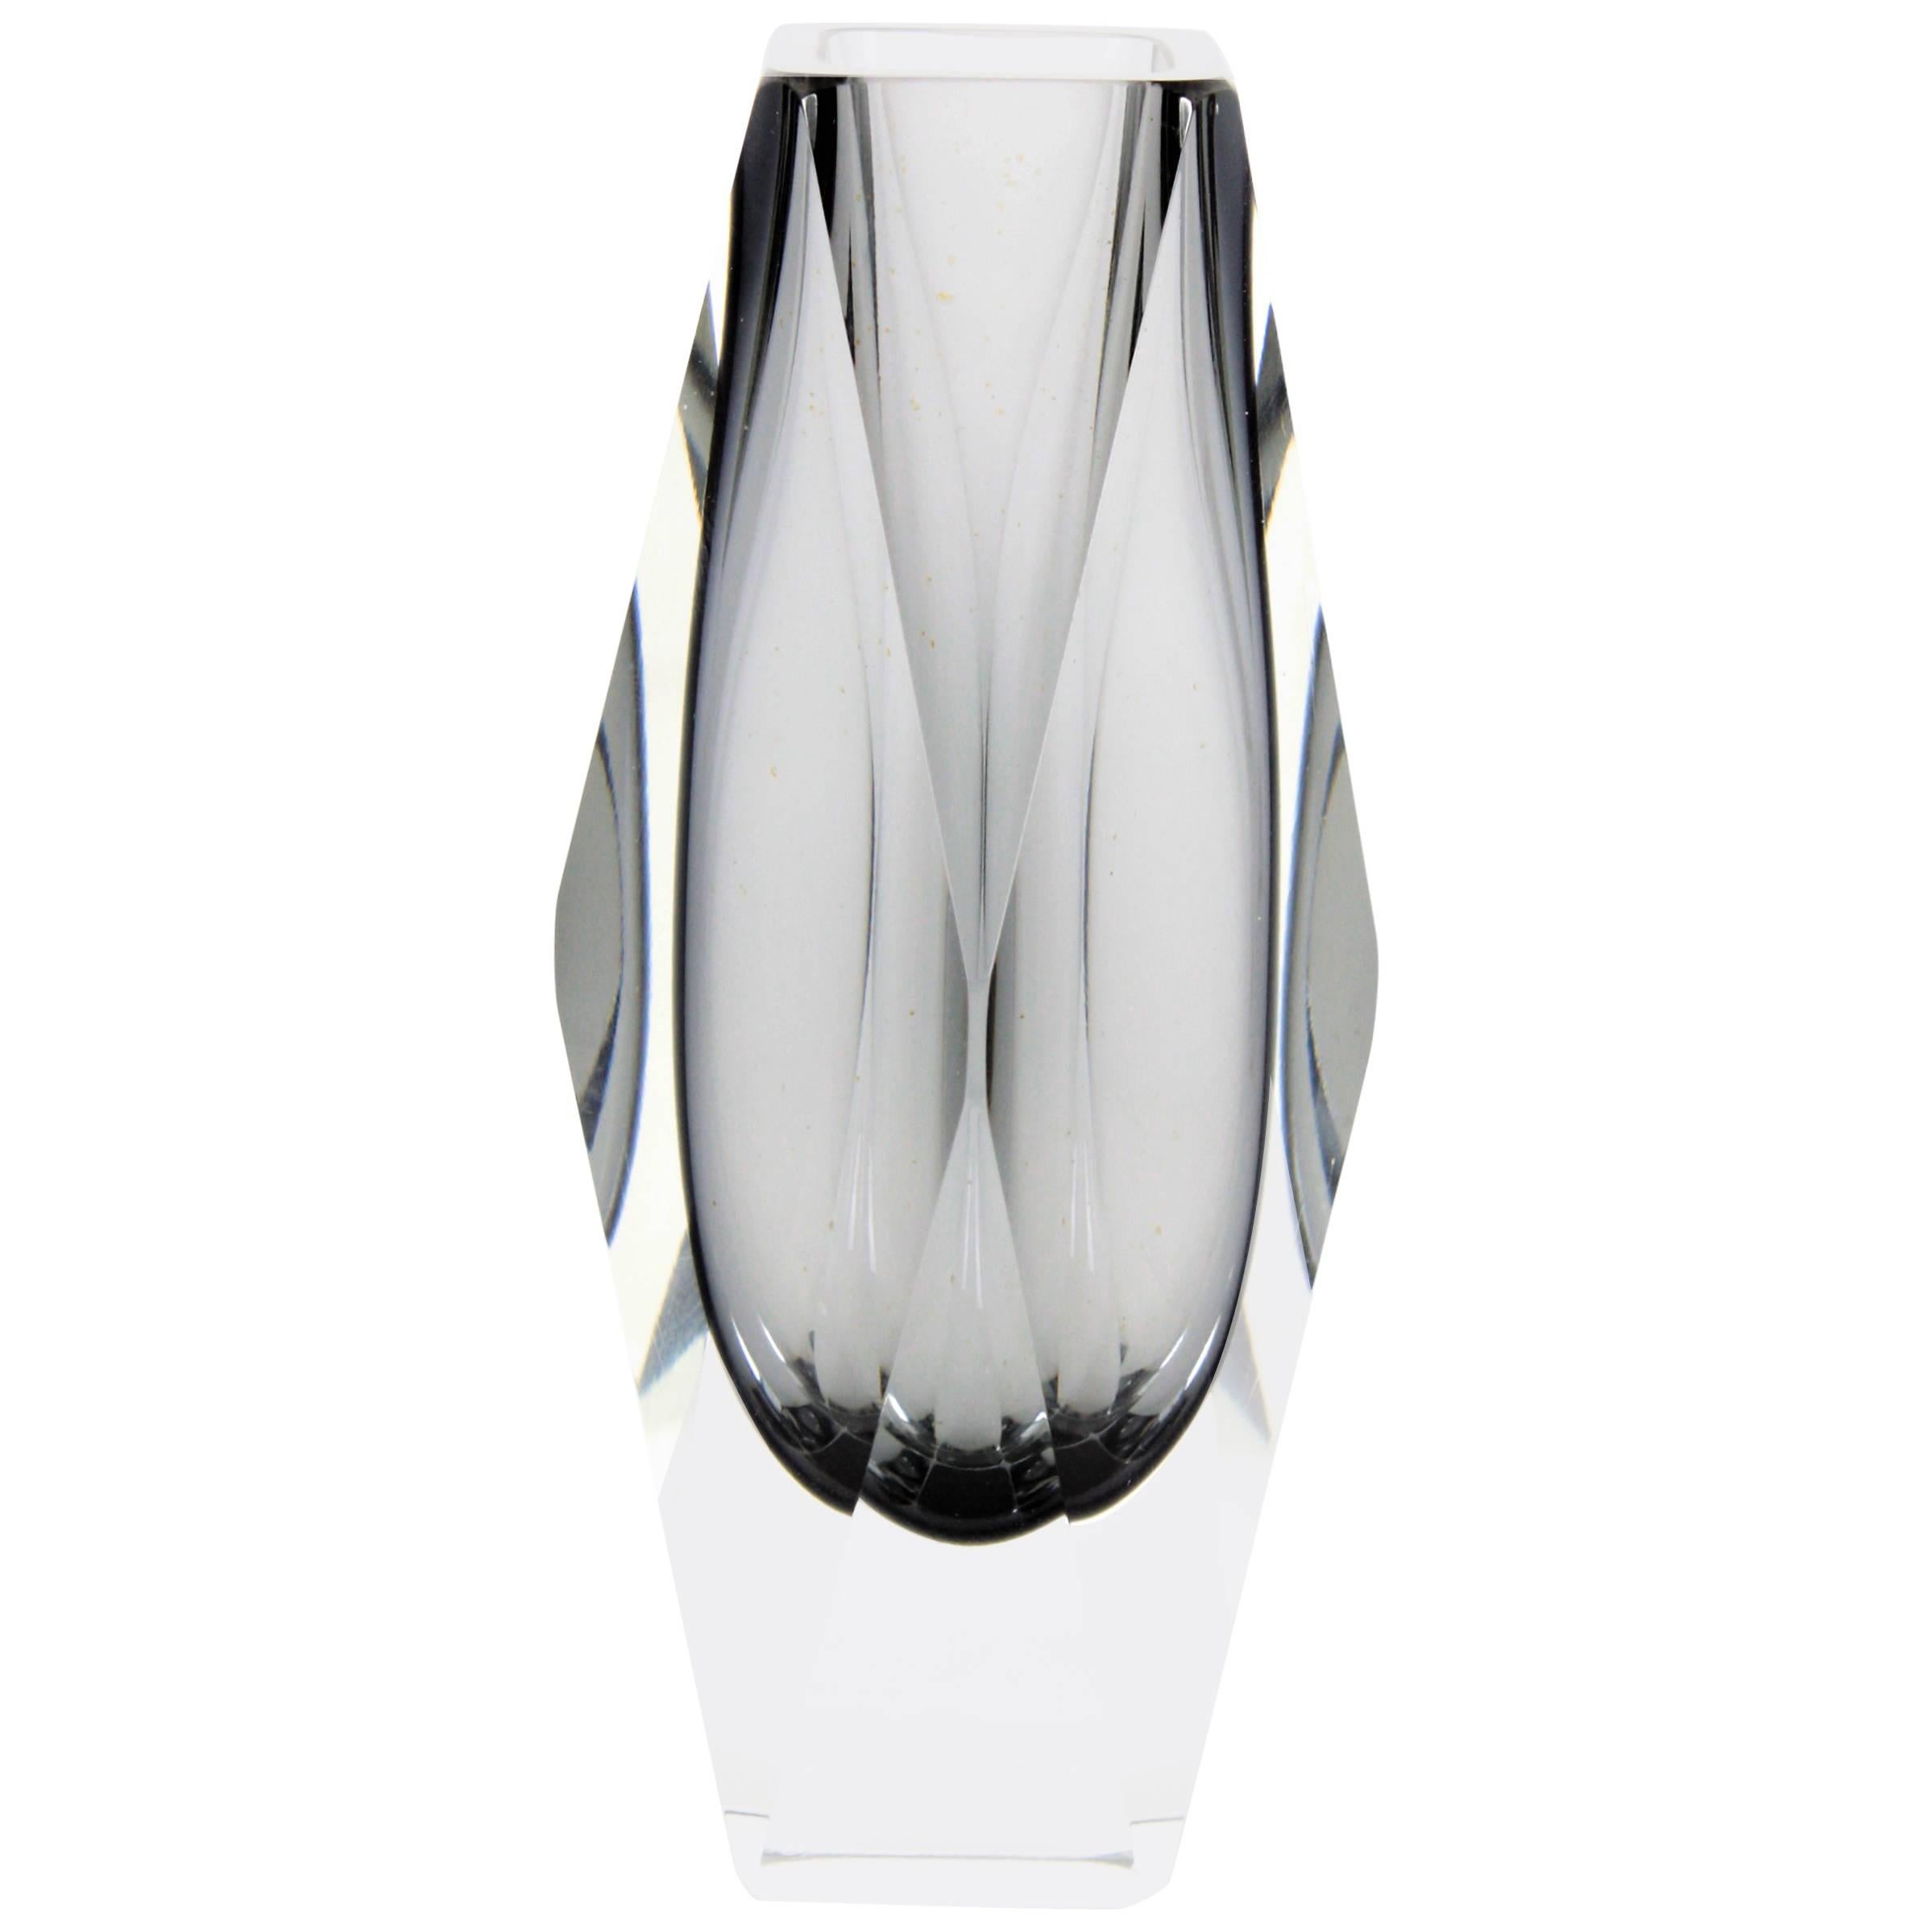 Midcentury Mandruzzato Smoked Grey and Clear Faceted Sommerso Murano Glass Vase